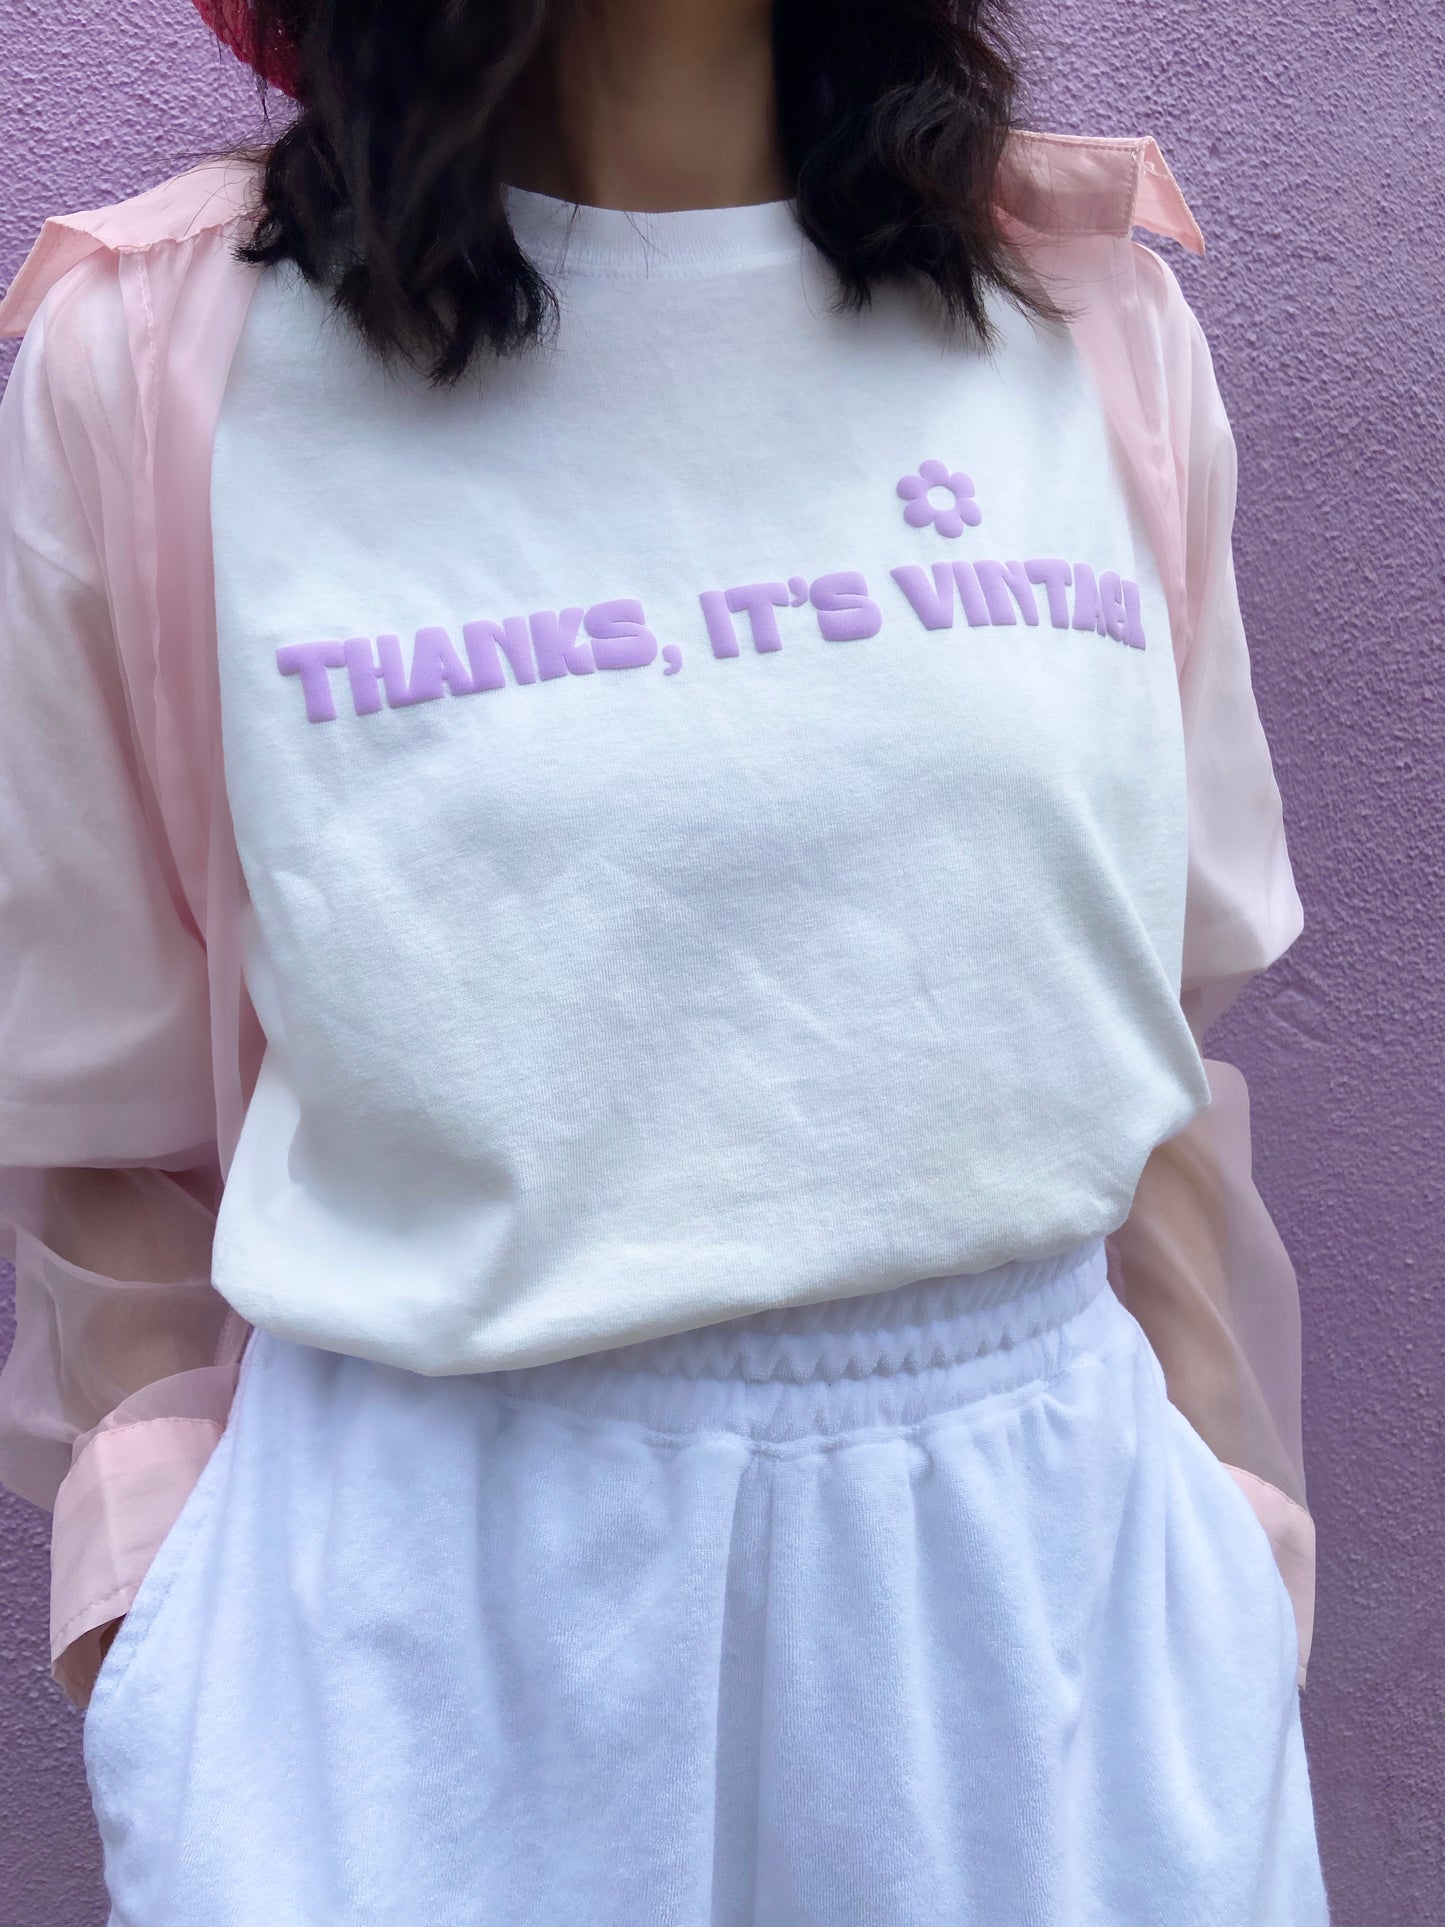 Thanks, It’s Vintage Tee - White/ Lilac - Large